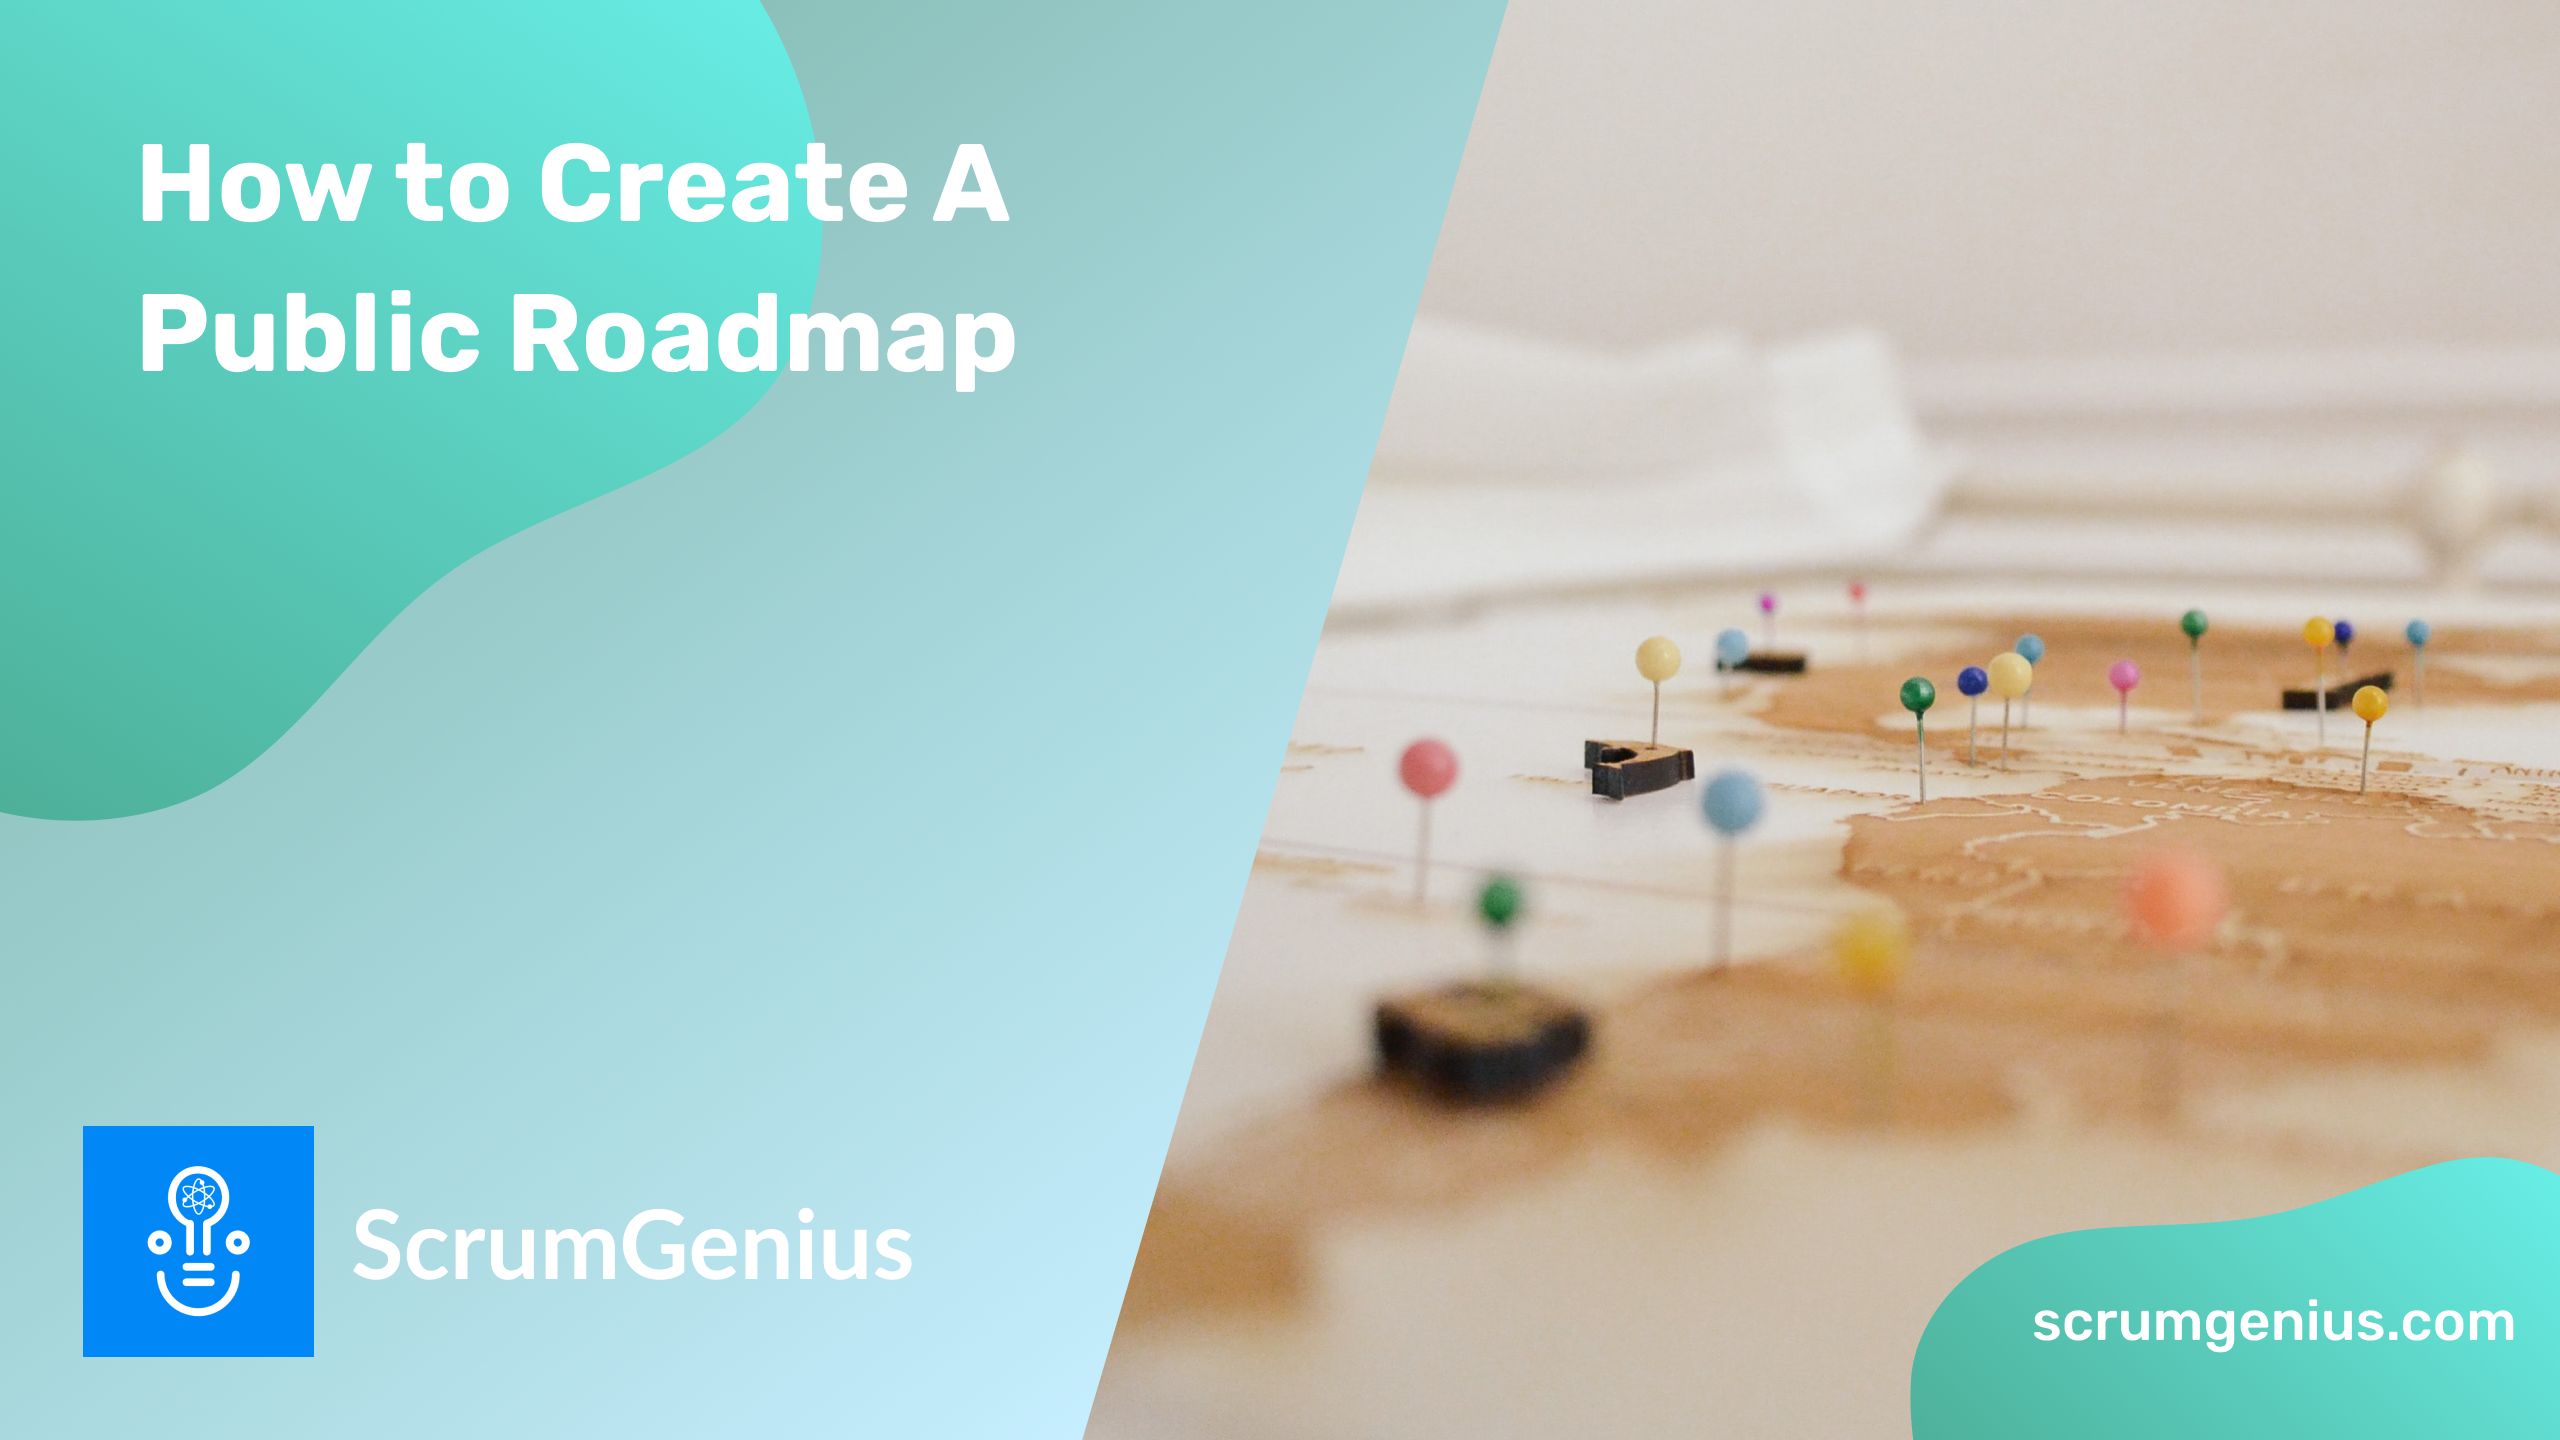 Our Guide To Creating Knockout Public Roadmaps